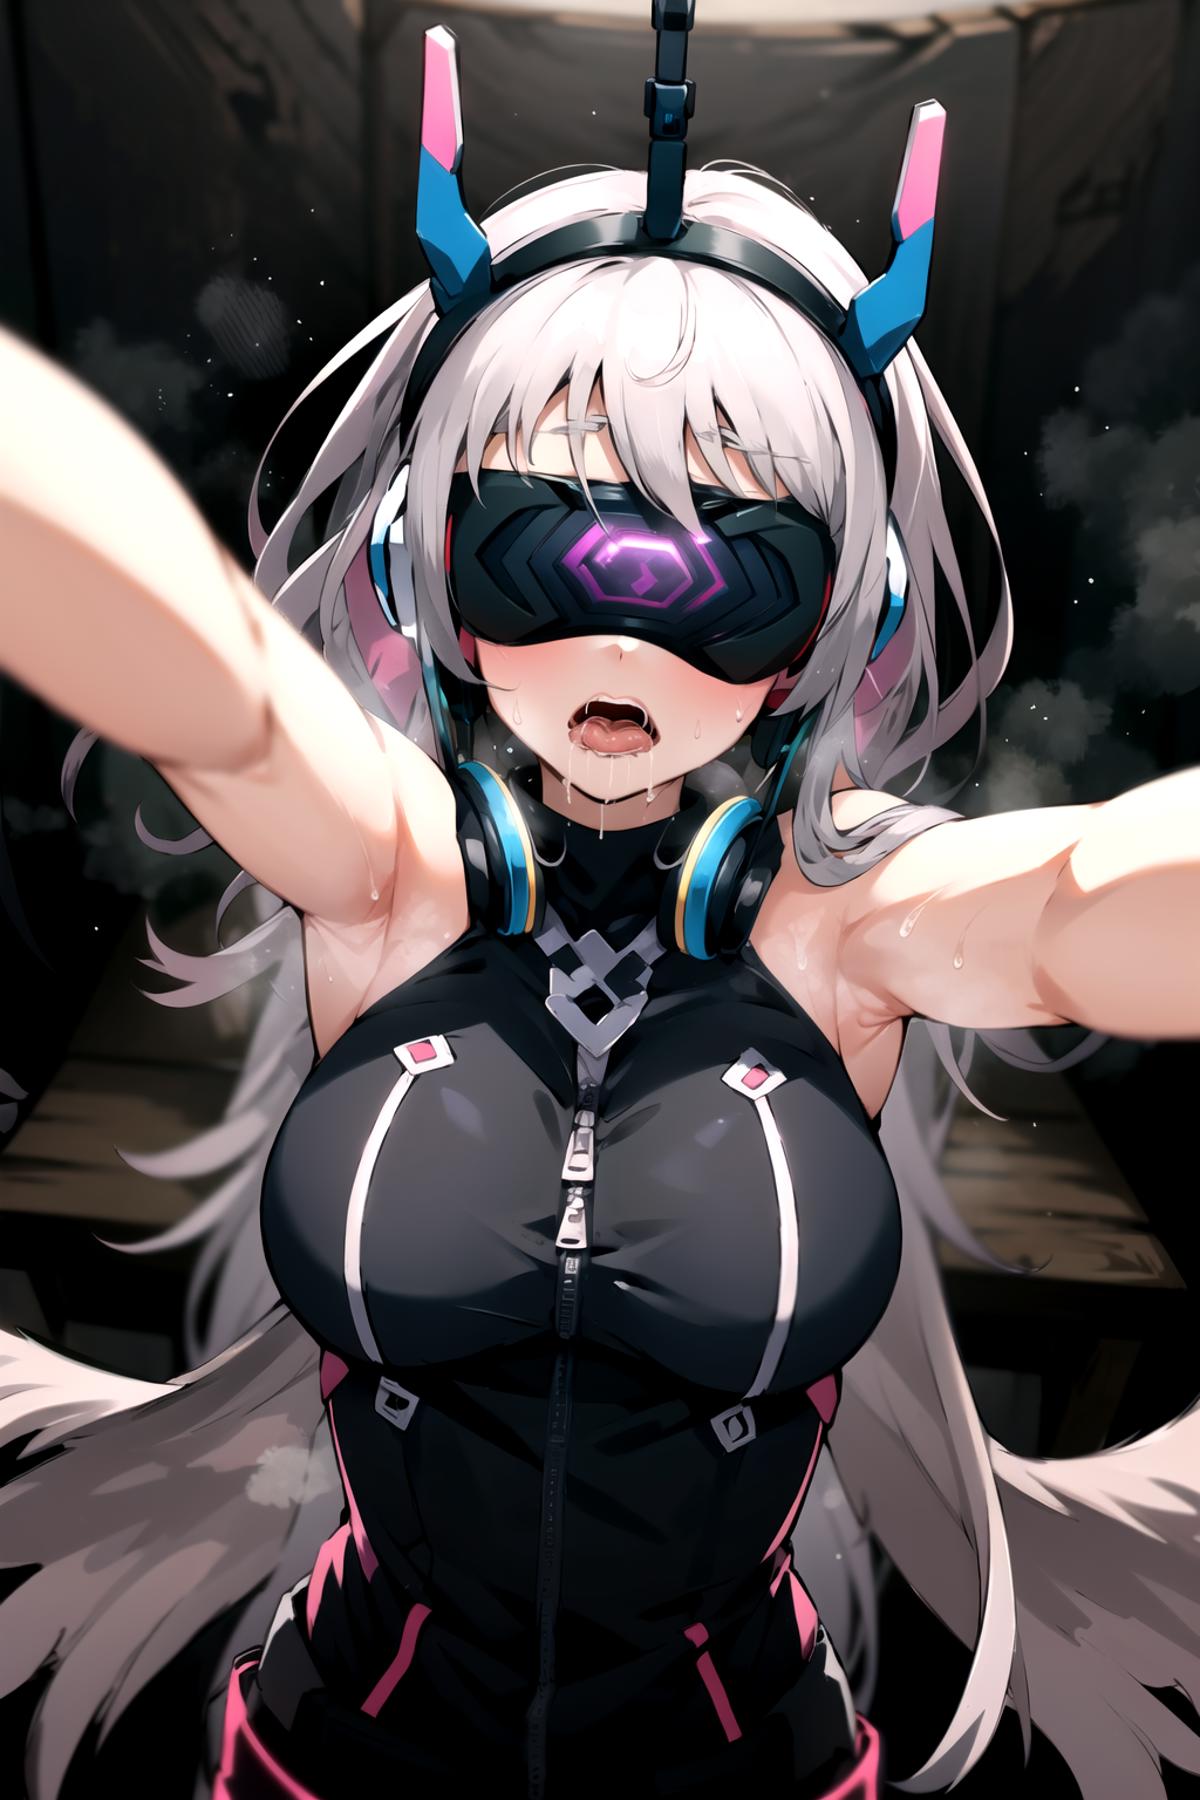 Change-A-Character: Hypnotic Visor, Your Waifu is Wearing a Visor! image by TwoMoreTimes89